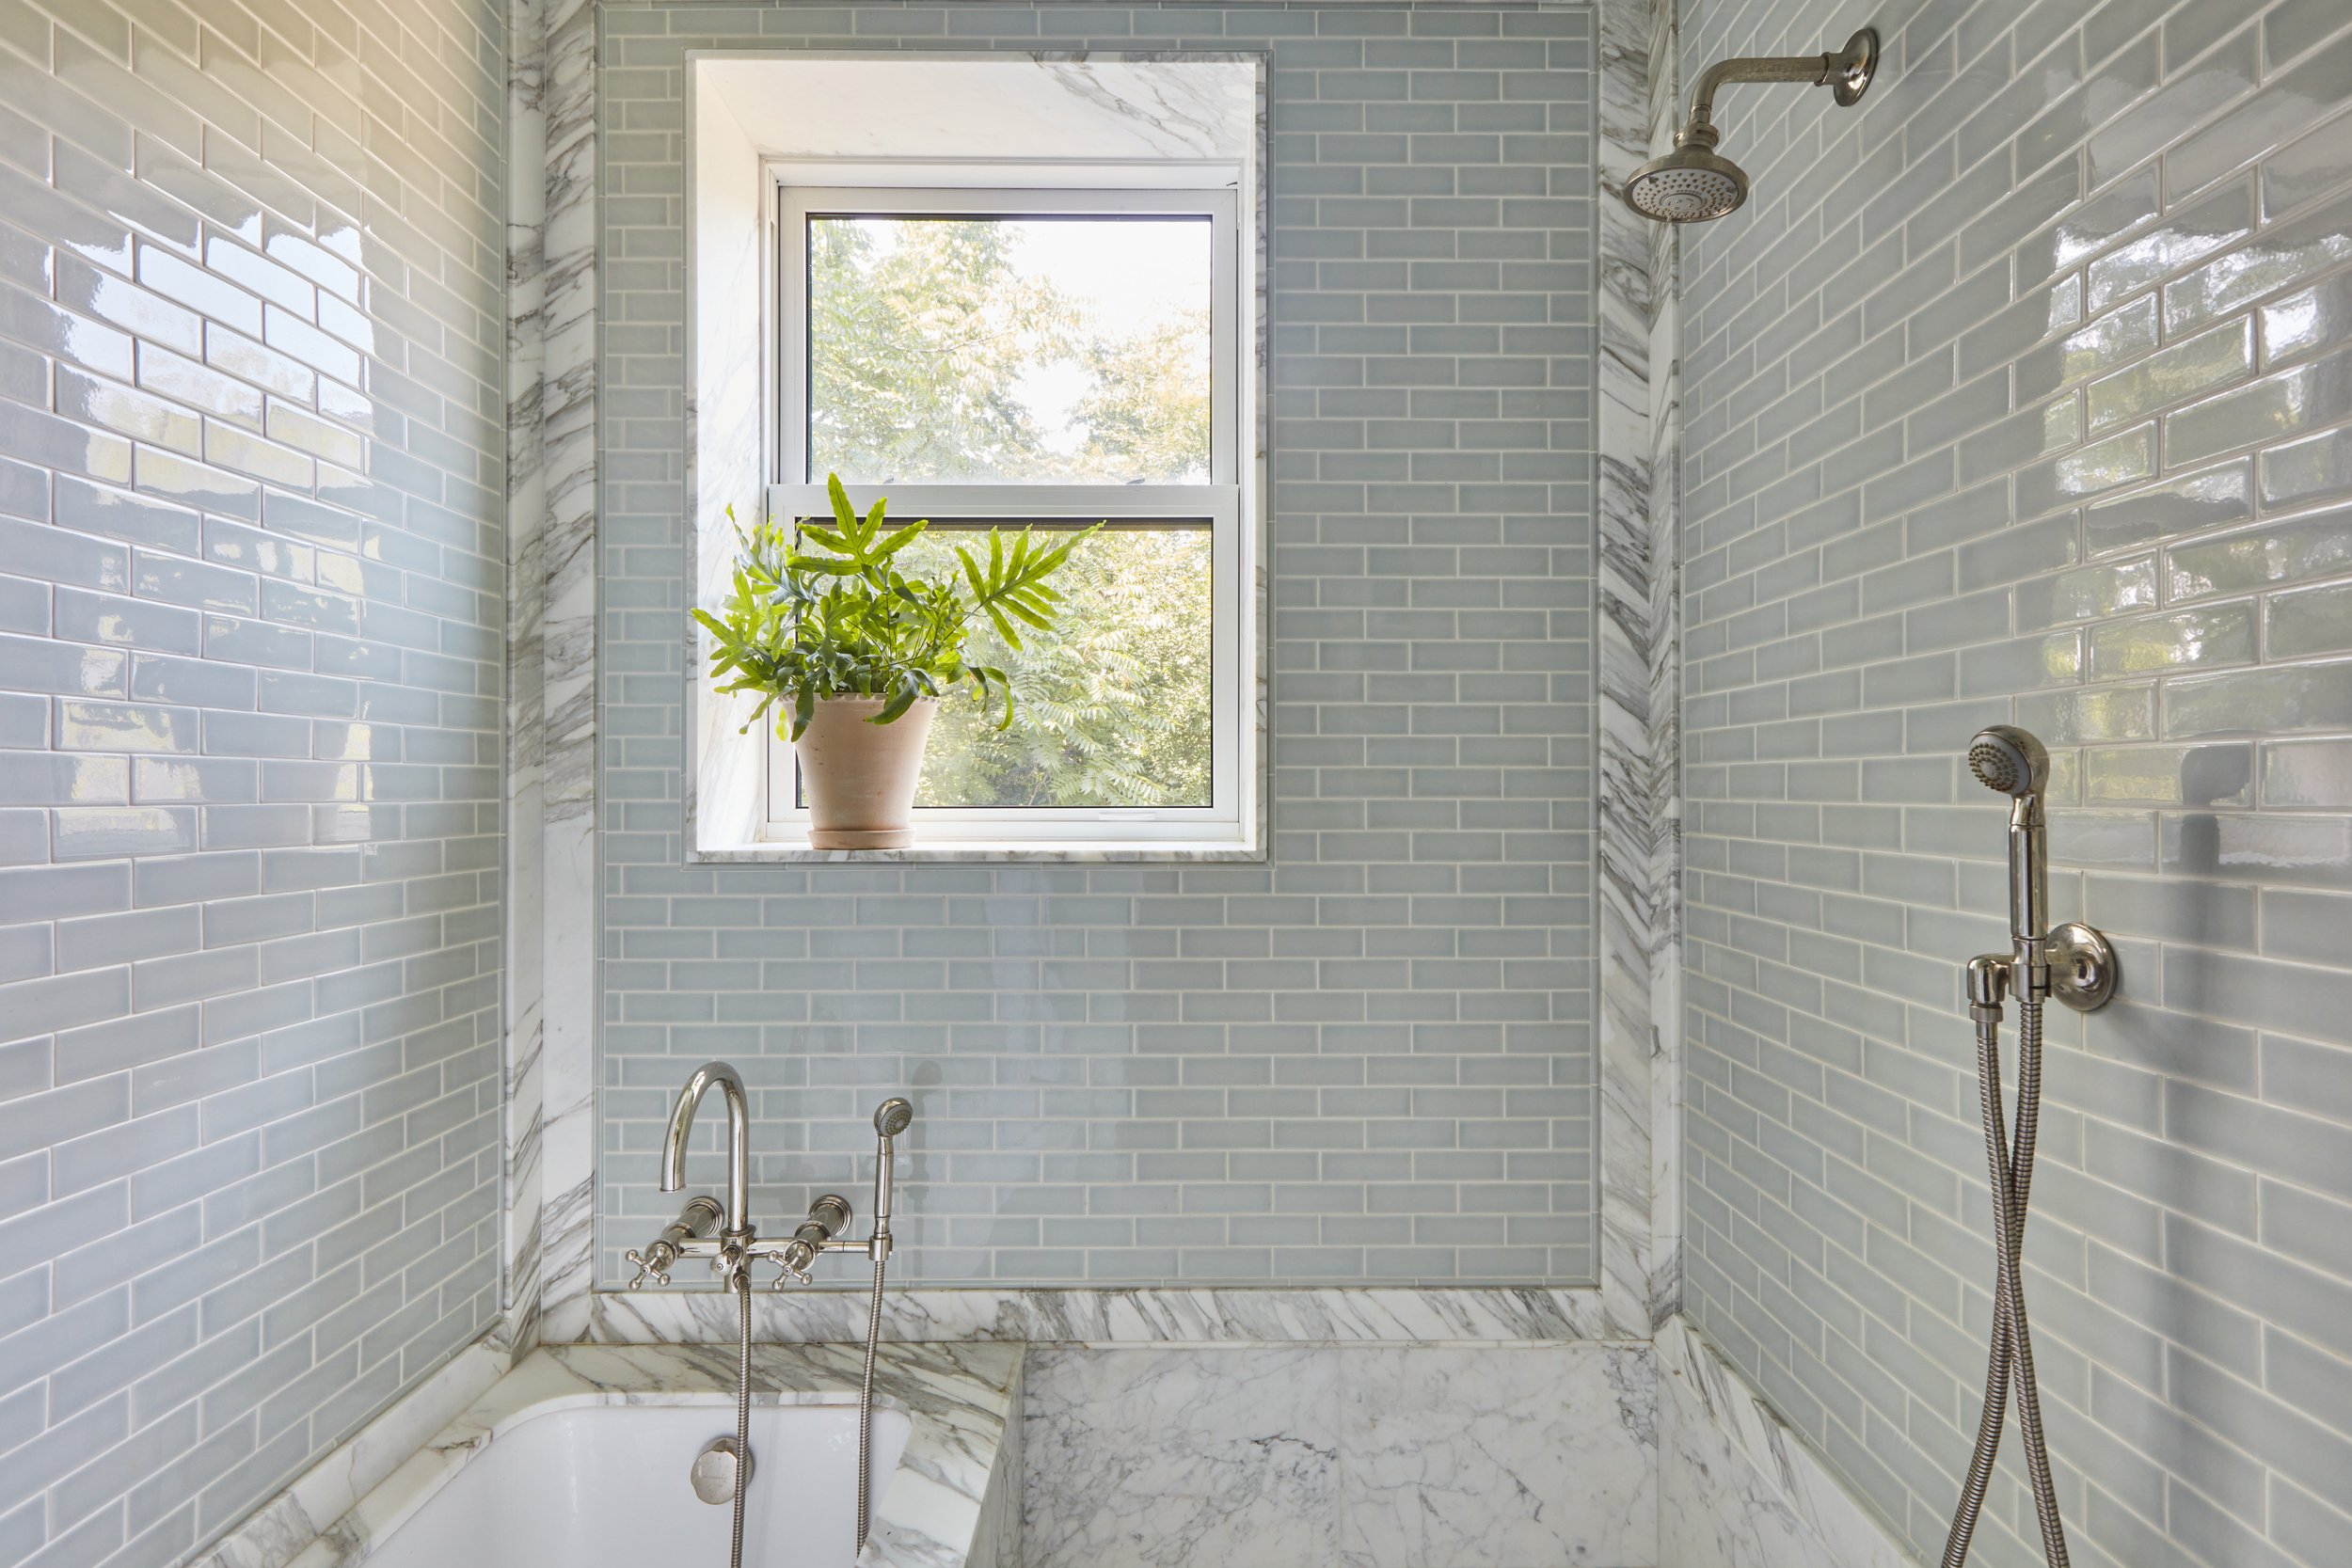  Charlap Hyman &amp; Herrero NV / Design Architecture, Kim Letven  Private Brooklyn Townhouse   This spacious bathtub and shower titled head to toe features a window to their backyard with a large tree that allows natural light and privacy. 